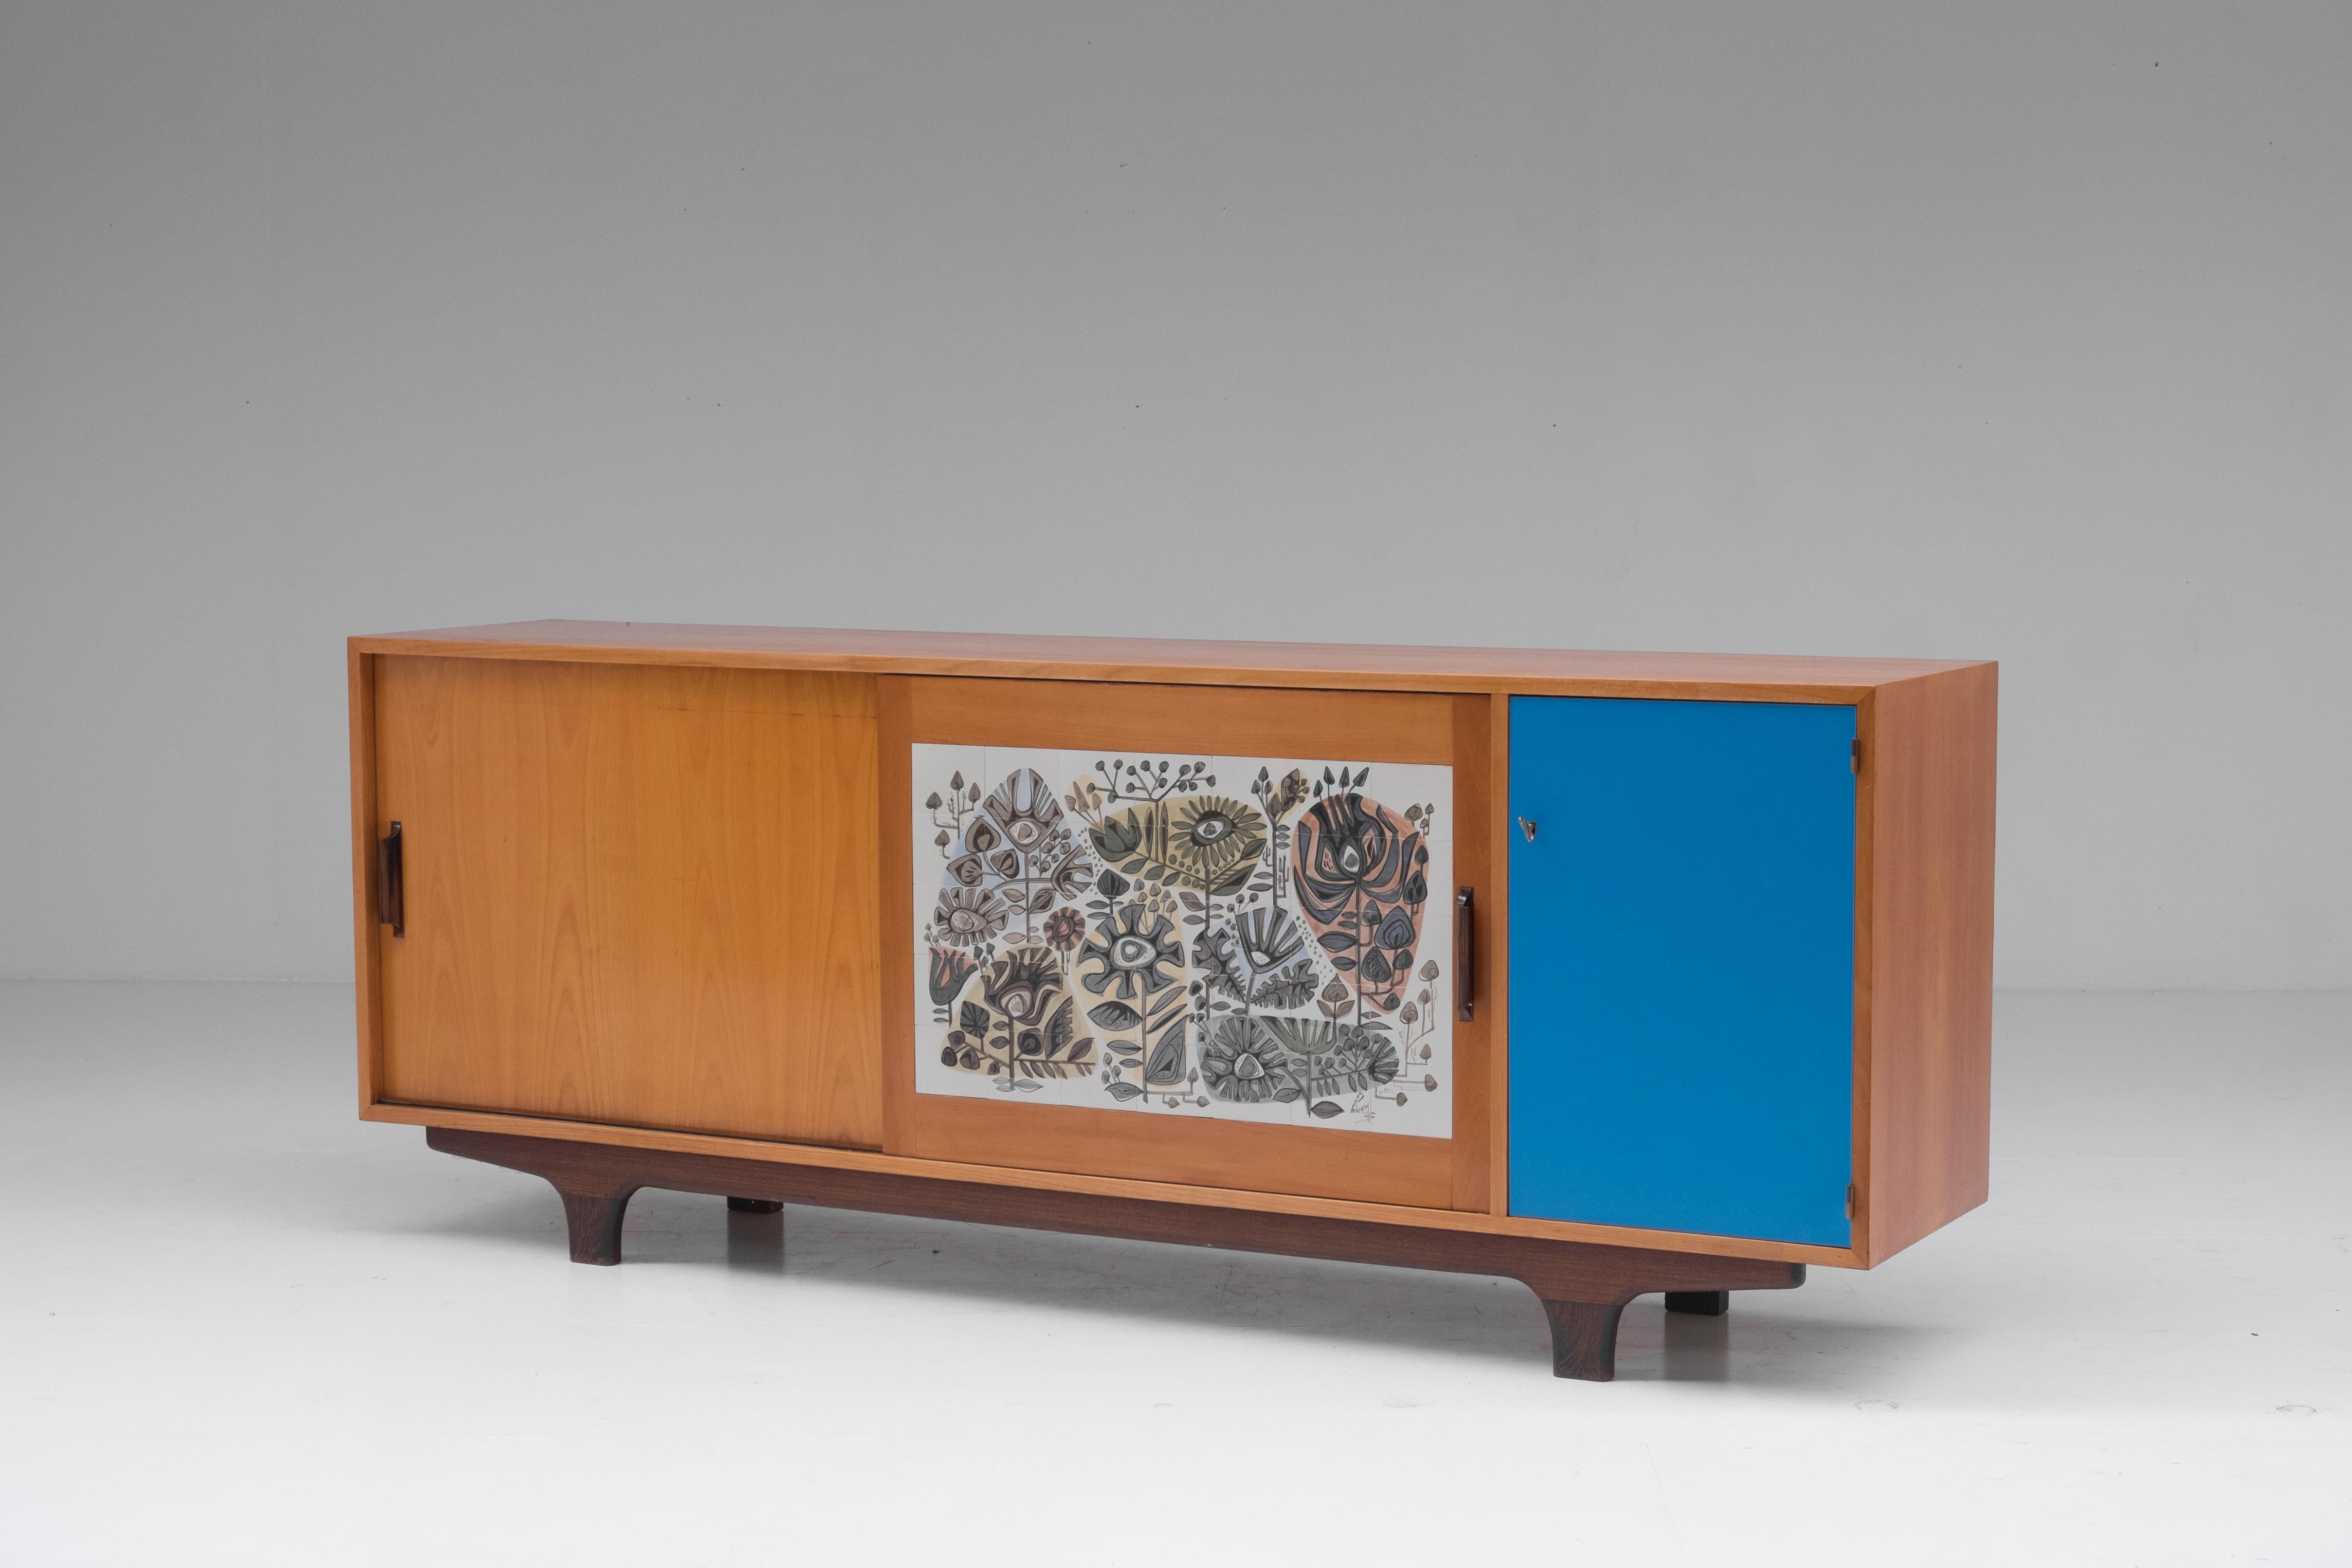 Midcentury modernist credenza with sliding doors from the 1950s, Belgium.
The sideboard shows some very prolific details which shows signs of great quality.
Just look at the custom designed ceramic Perignem piece on the door panel, the sky blue